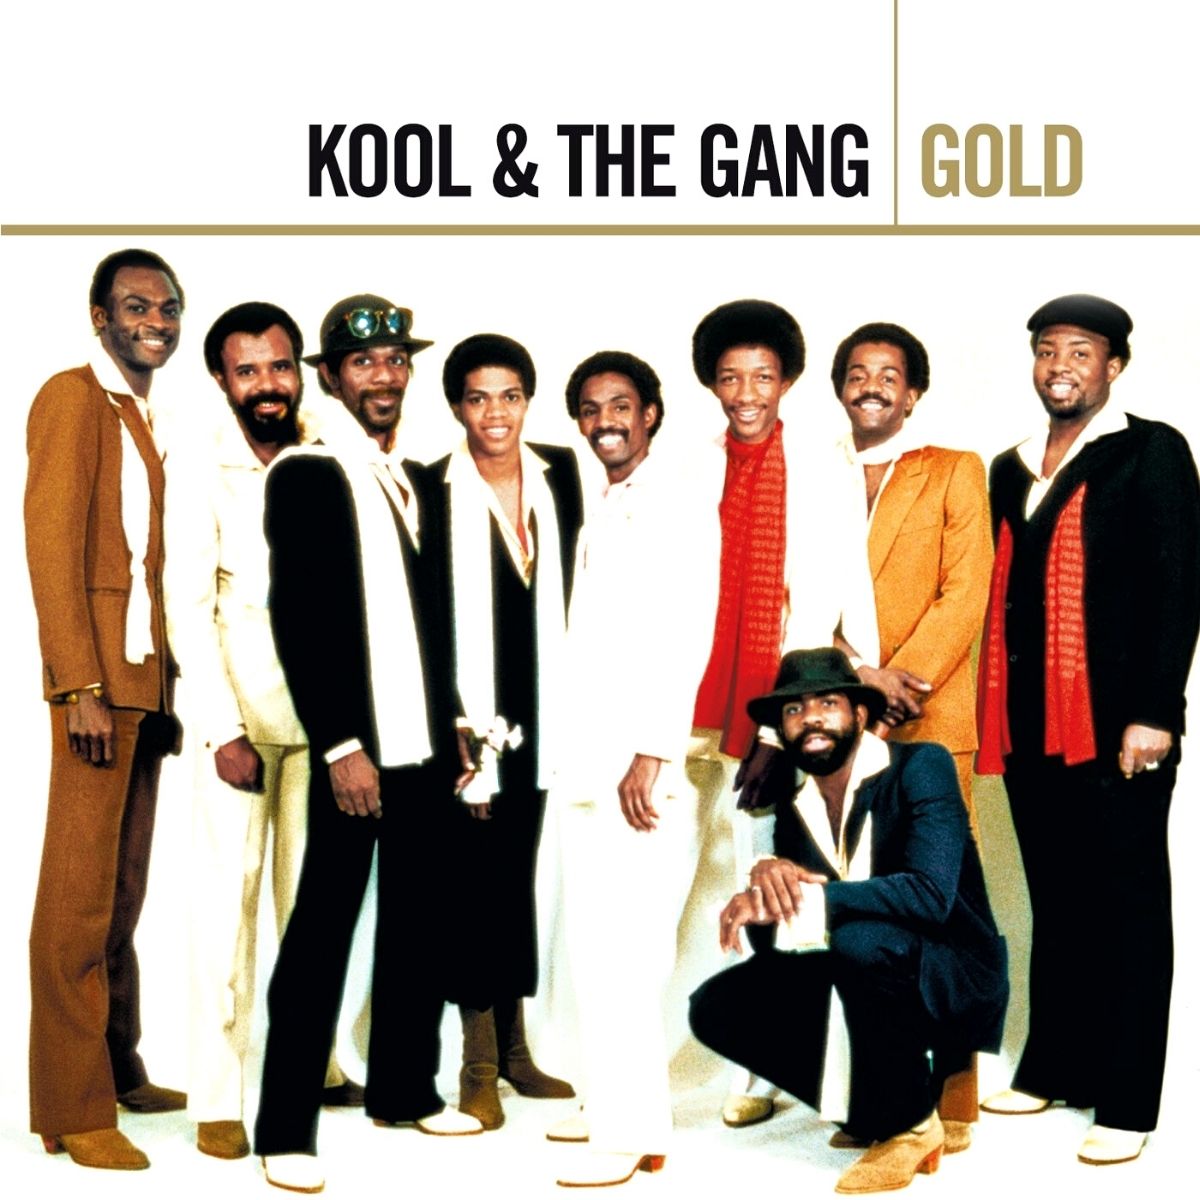 Kool & The Gang on their album cover